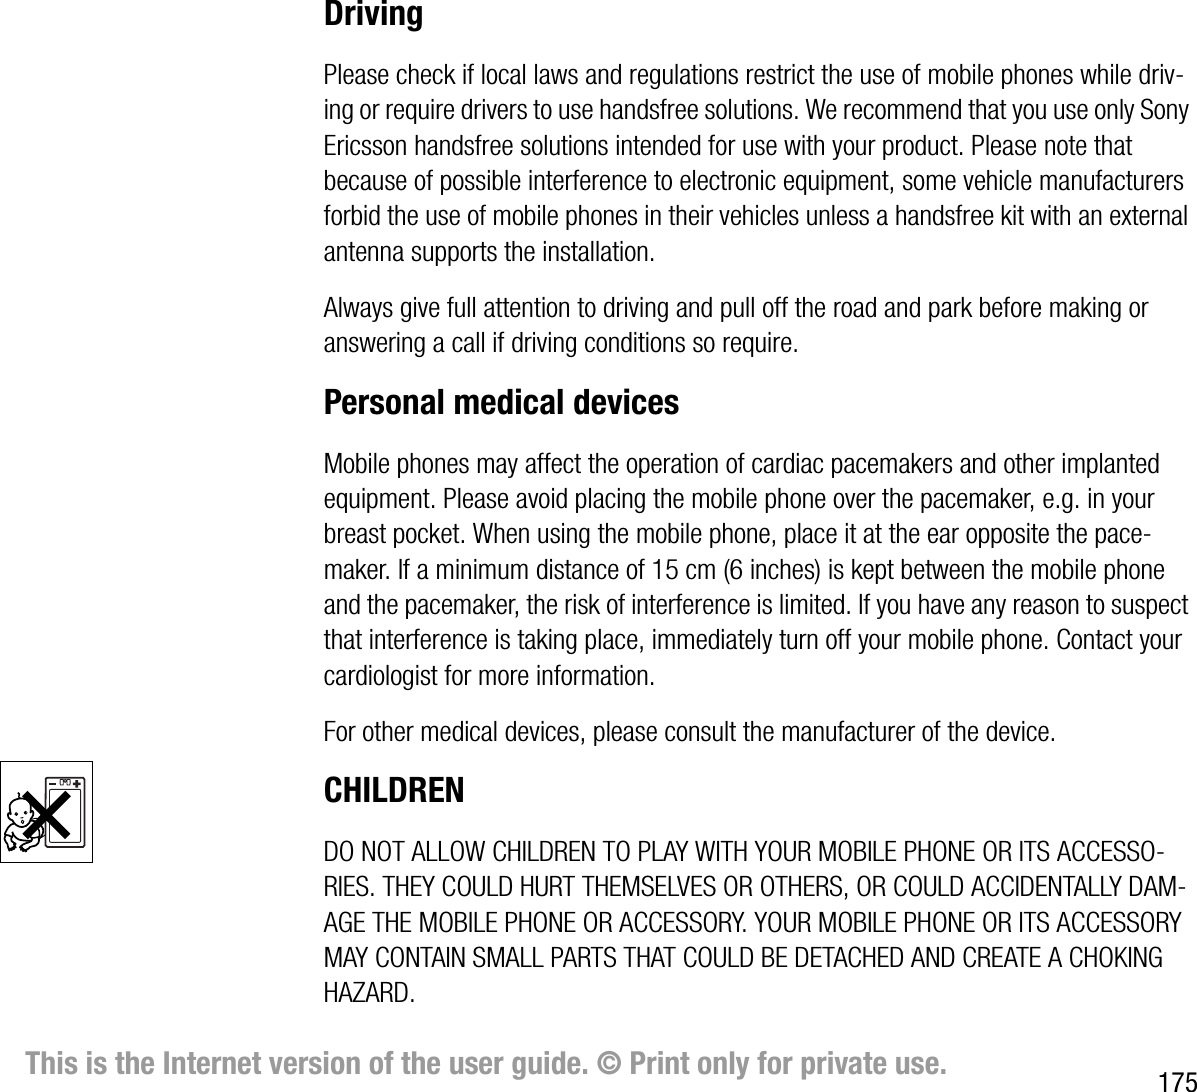 175This is the Internet version of the user guide. © Print only for private use.DrivingPlease check if local laws and regulations restrict the use of mobile phones while driving or require drivers to use handsfree solutions. We recommend that you use only Sony Ericsson handsfree solutions intended for use with your product. Please note that because of possible interference to electronic equipment, some vehicle manufacturers forbid the use of mobile phones in their vehicles unless a handsfree kit with an external antenna supports the installation.Always give full attention to driving and pull off the road and park before making or answering a call if driving conditions so require.Personal medical devicesMobile phones may affect the operation of cardiac pacemakers and other implanted equipment. Please avoid placing the mobile phone over the pacemaker, e.g. in your breast pocket. When using the mobile phone, place it at the ear opposite the pacemaker. If a minimum distance of 15 cm (6 inches) is kept between the mobile phone and the pacemaker, the risk of interference is limited. If you have any reason to suspect that interference is taking place, immediately turn off your mobile phone. Contact your cardiologist for more information.For other medical devices, please consult the manufacturer of the device.CHILDRENDO NOT ALLOW CHILDREN TO PLAY WITH YOUR MOBILE PHONE OR ITS ACCESSORIES. THEY COULD HURT THEMSELVES OR OTHERS, OR COULD ACCIDENTALLY DAMAGE THE MOBILE PHONE OR ACCESSORY. YOUR MOBILE PHONE OR ITS ACCESSORY MAY CONTAIN SMALL PARTS THAT COULD BE DETACHED AND CREATE A CHOKING HAZARD.